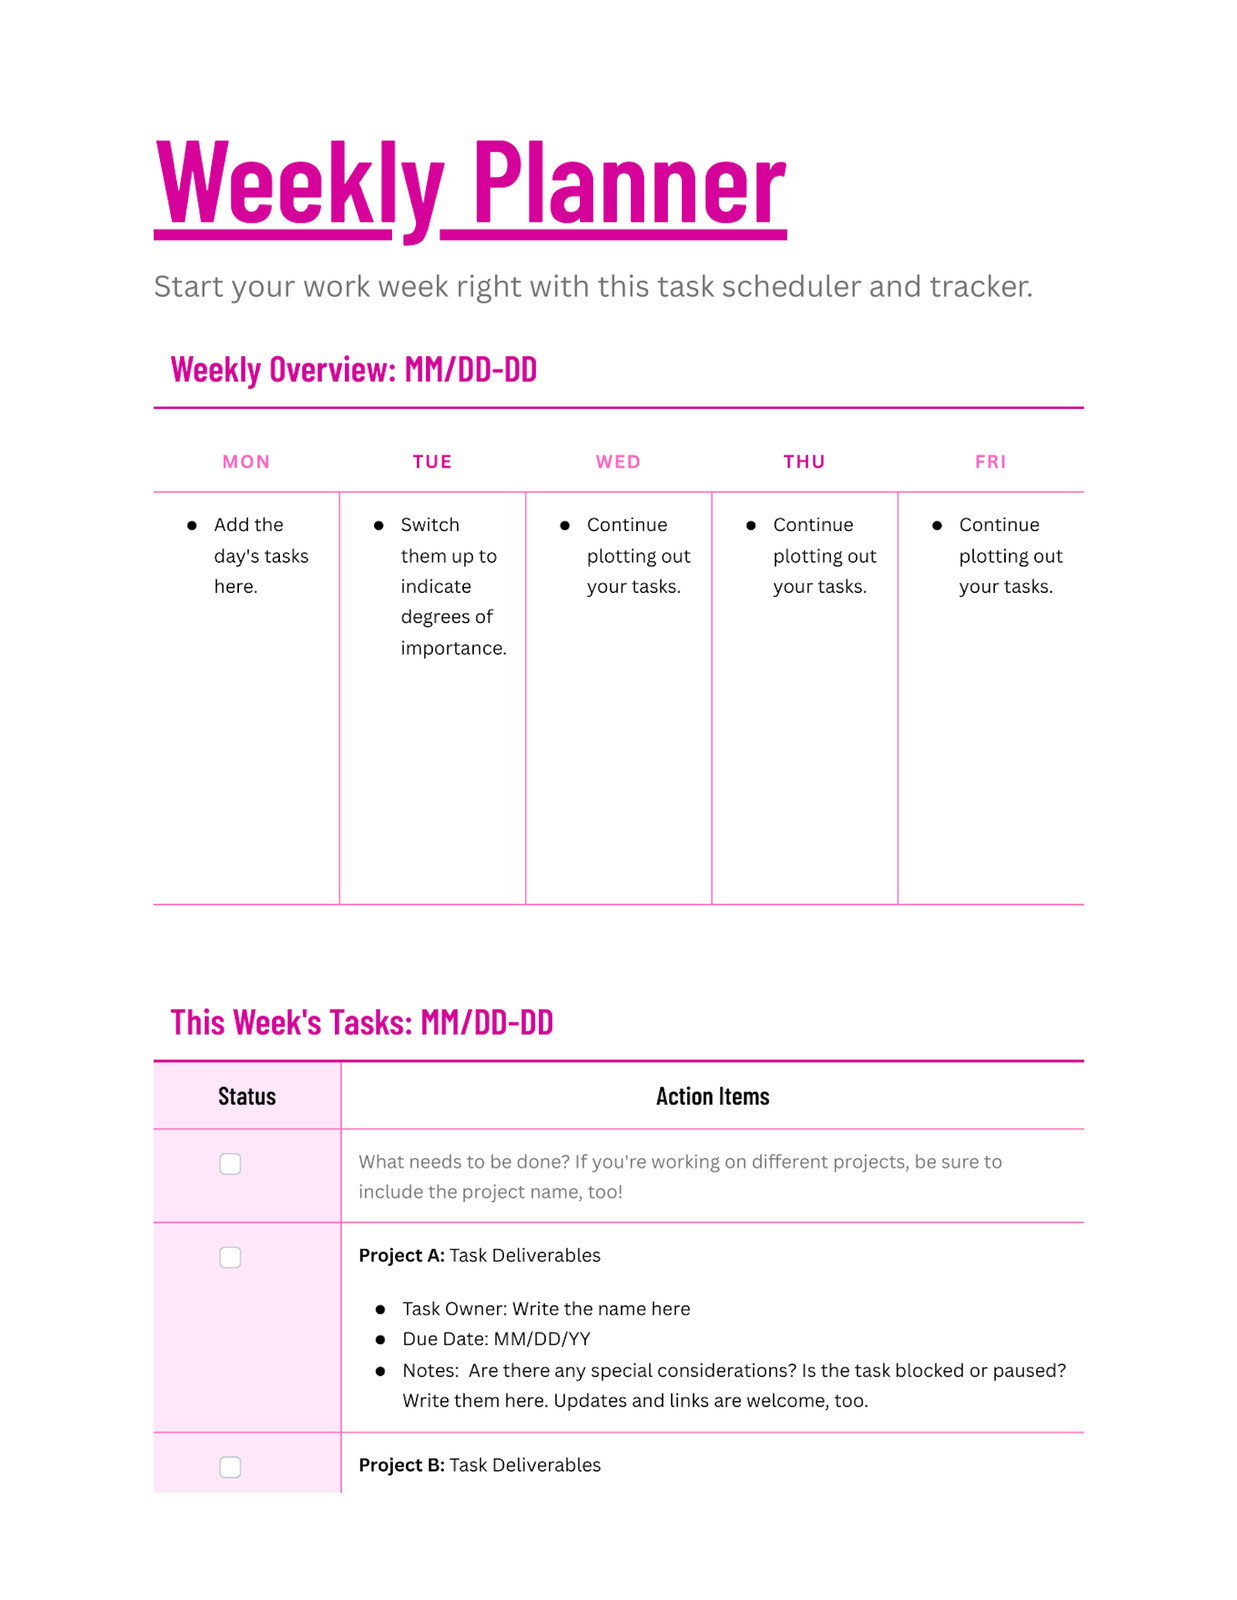 Weekly Planner Doc in Magenta Light Pink Vibrant Professional Style